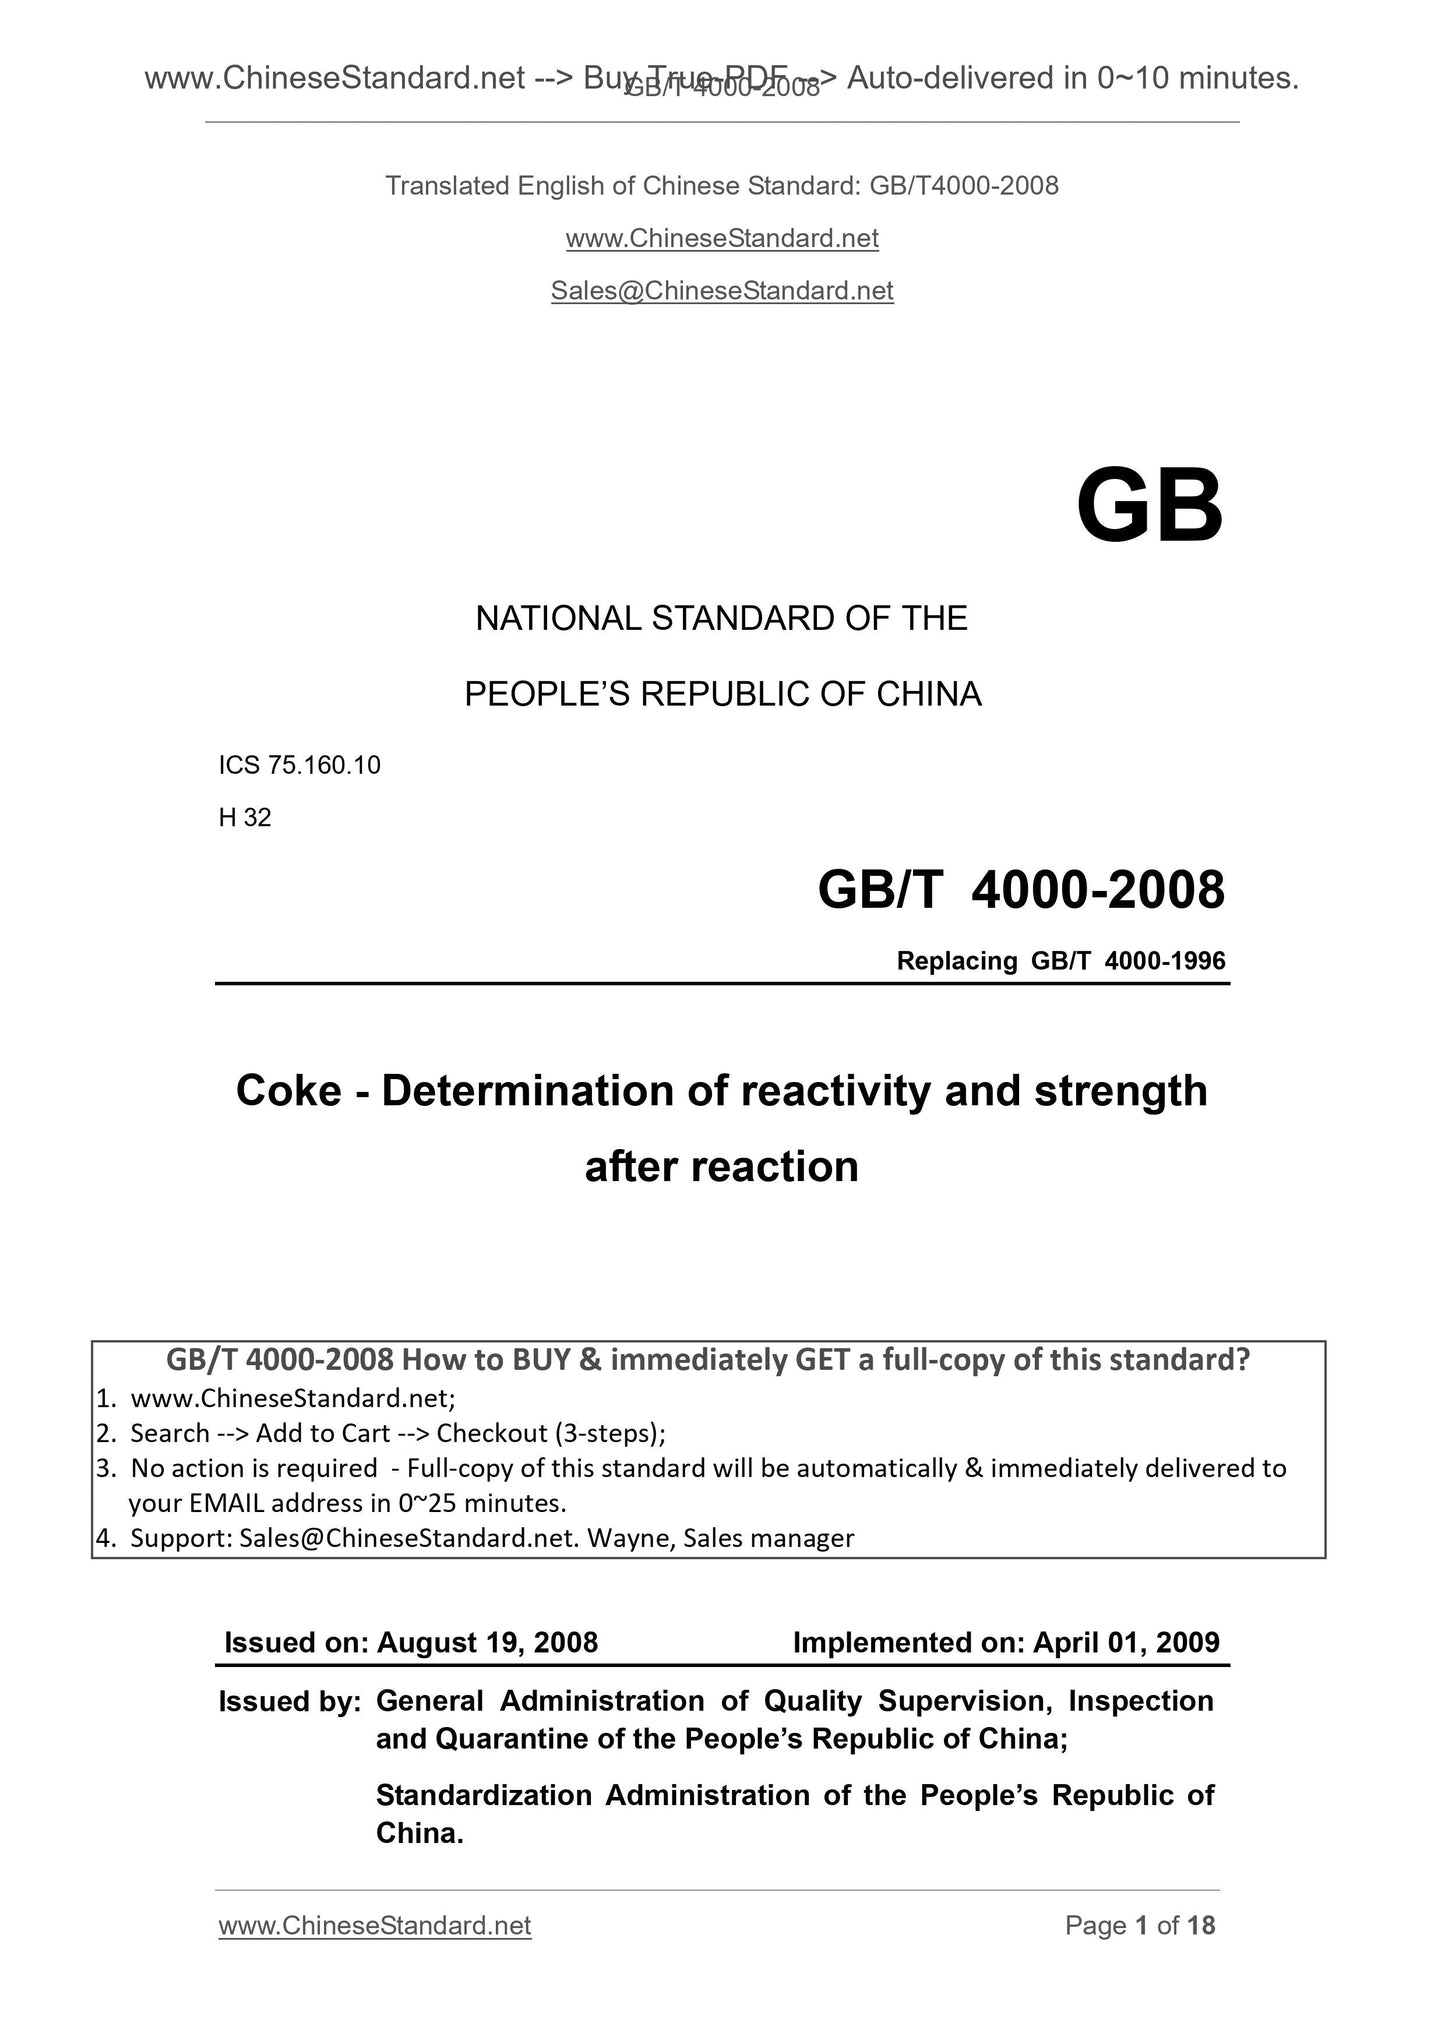 GB/T 4000-2008 Page 1